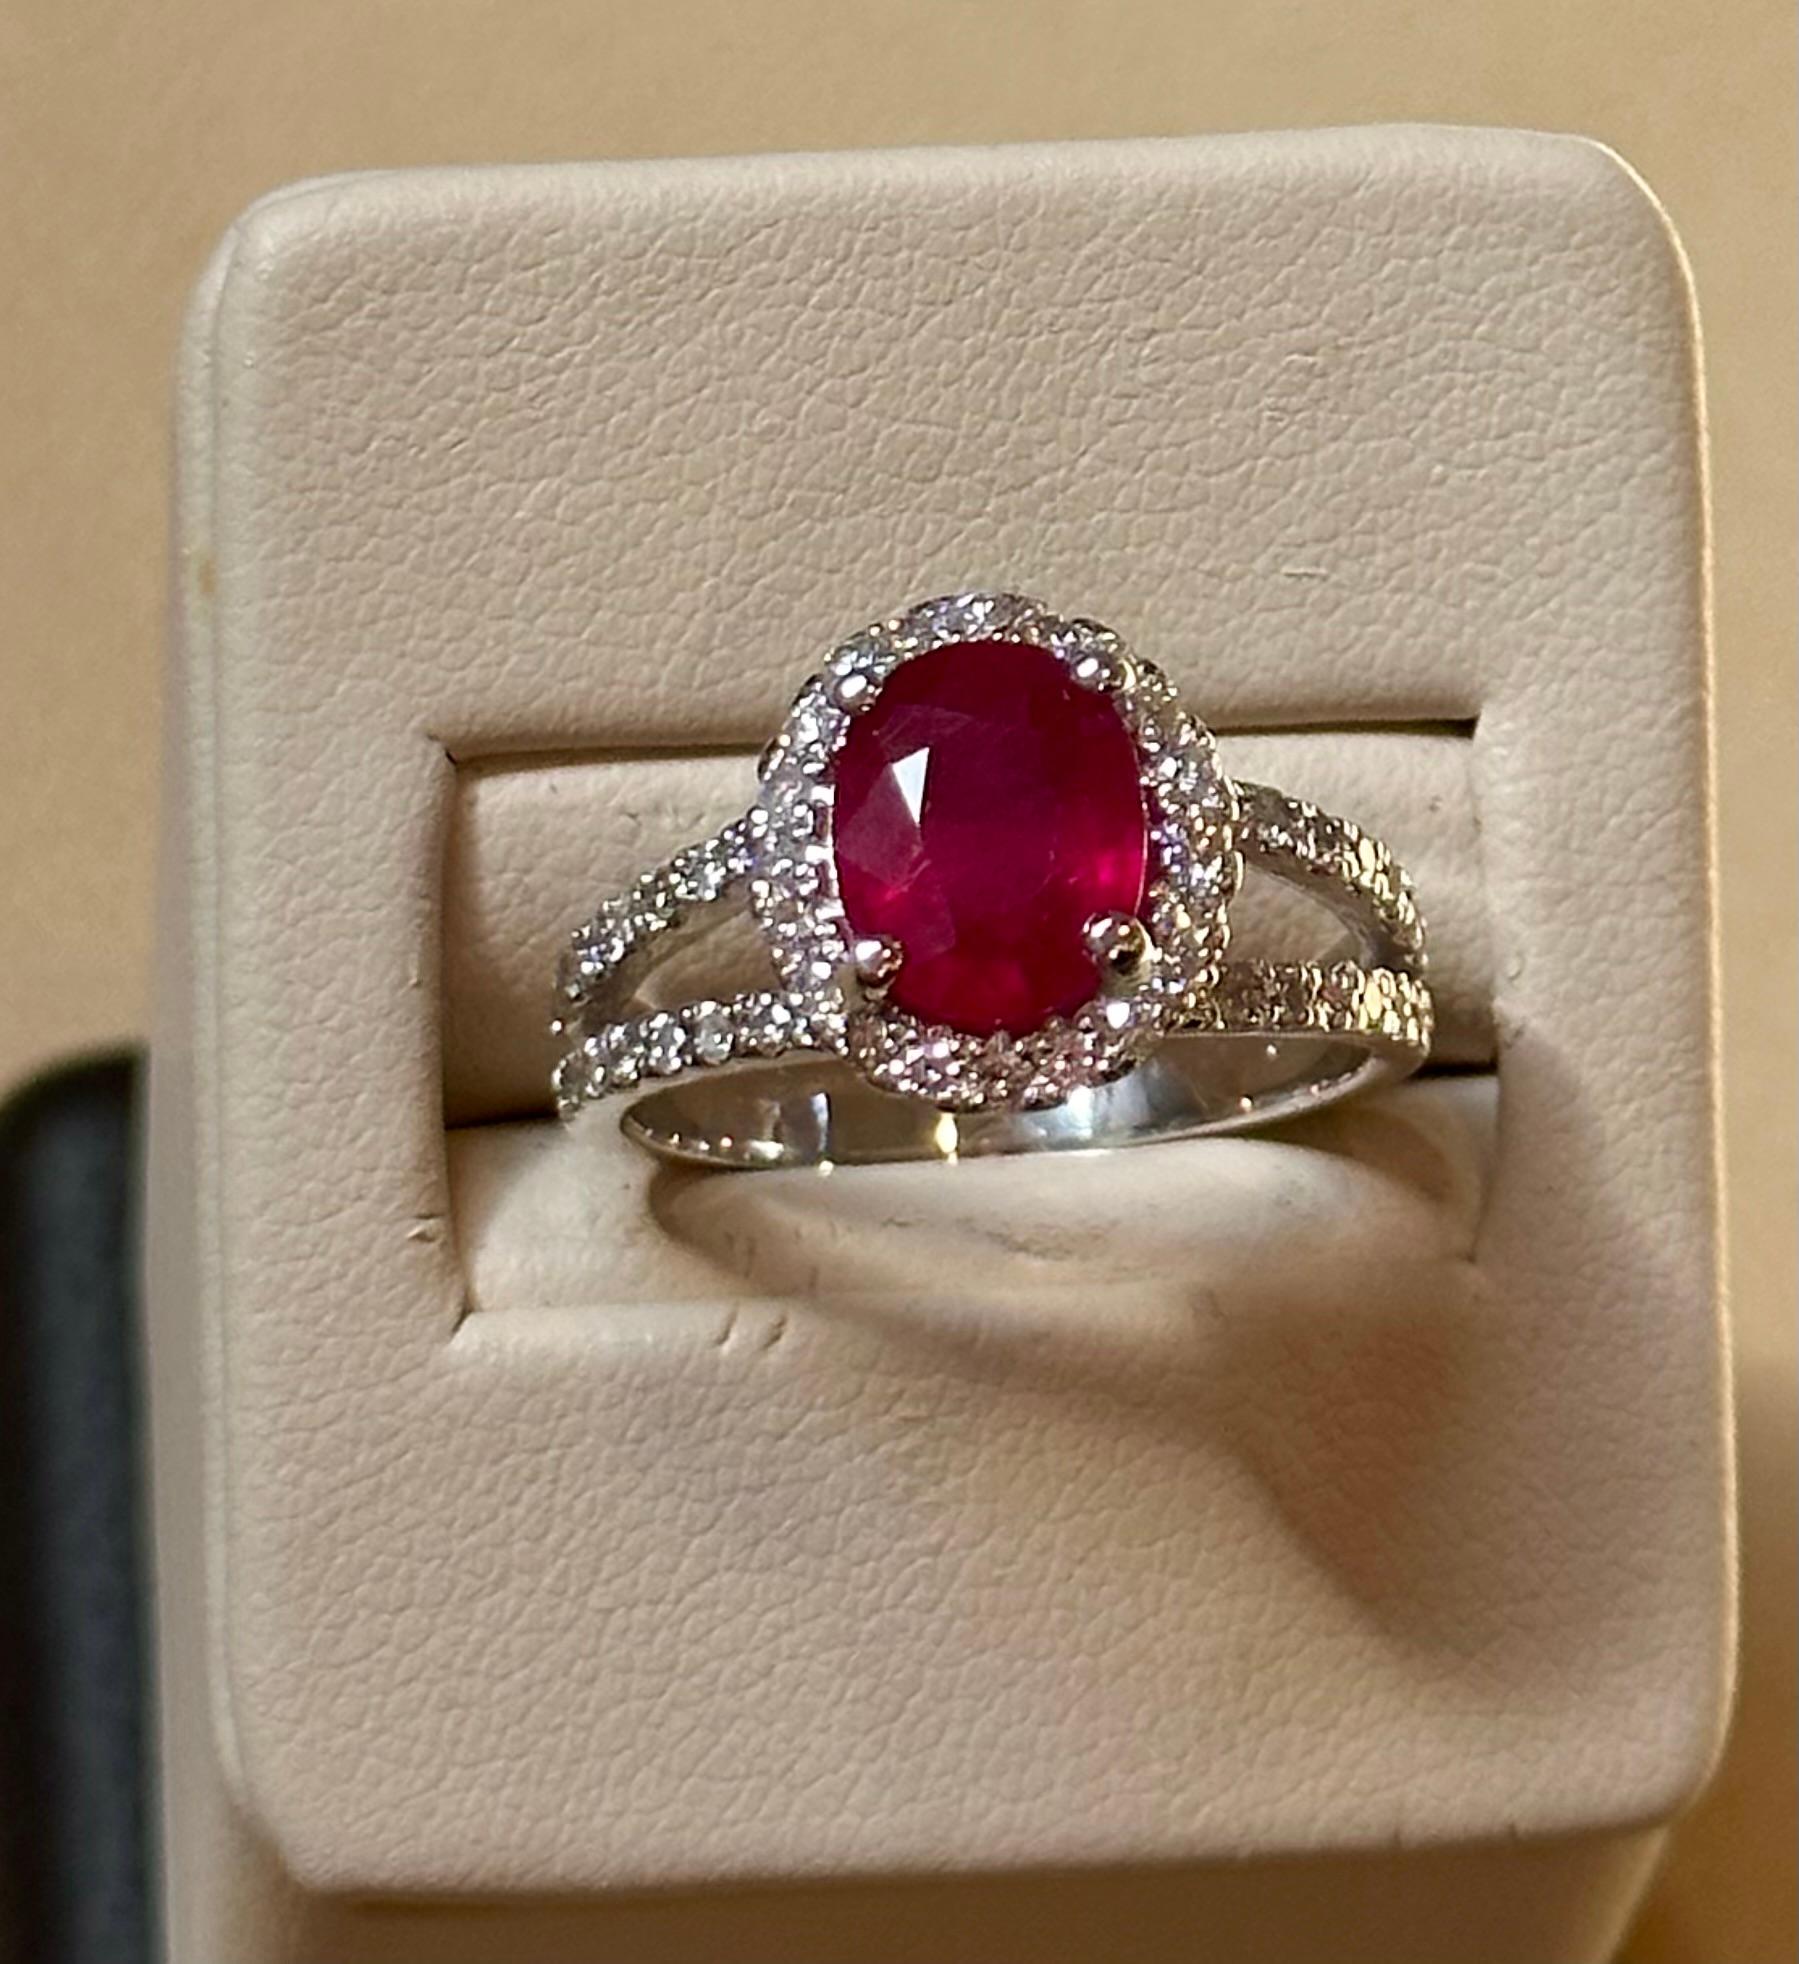 Prepare to be amazed by the sheer beauty of the 2.5 Carat Oval Treated Ruby & 2 ct of Diamond Ring, a true masterpiece crafted in exquisite 14 Karat White Gold. This extraordinary ring showcases a magnificent oval cut ruby  to perfection, weighing